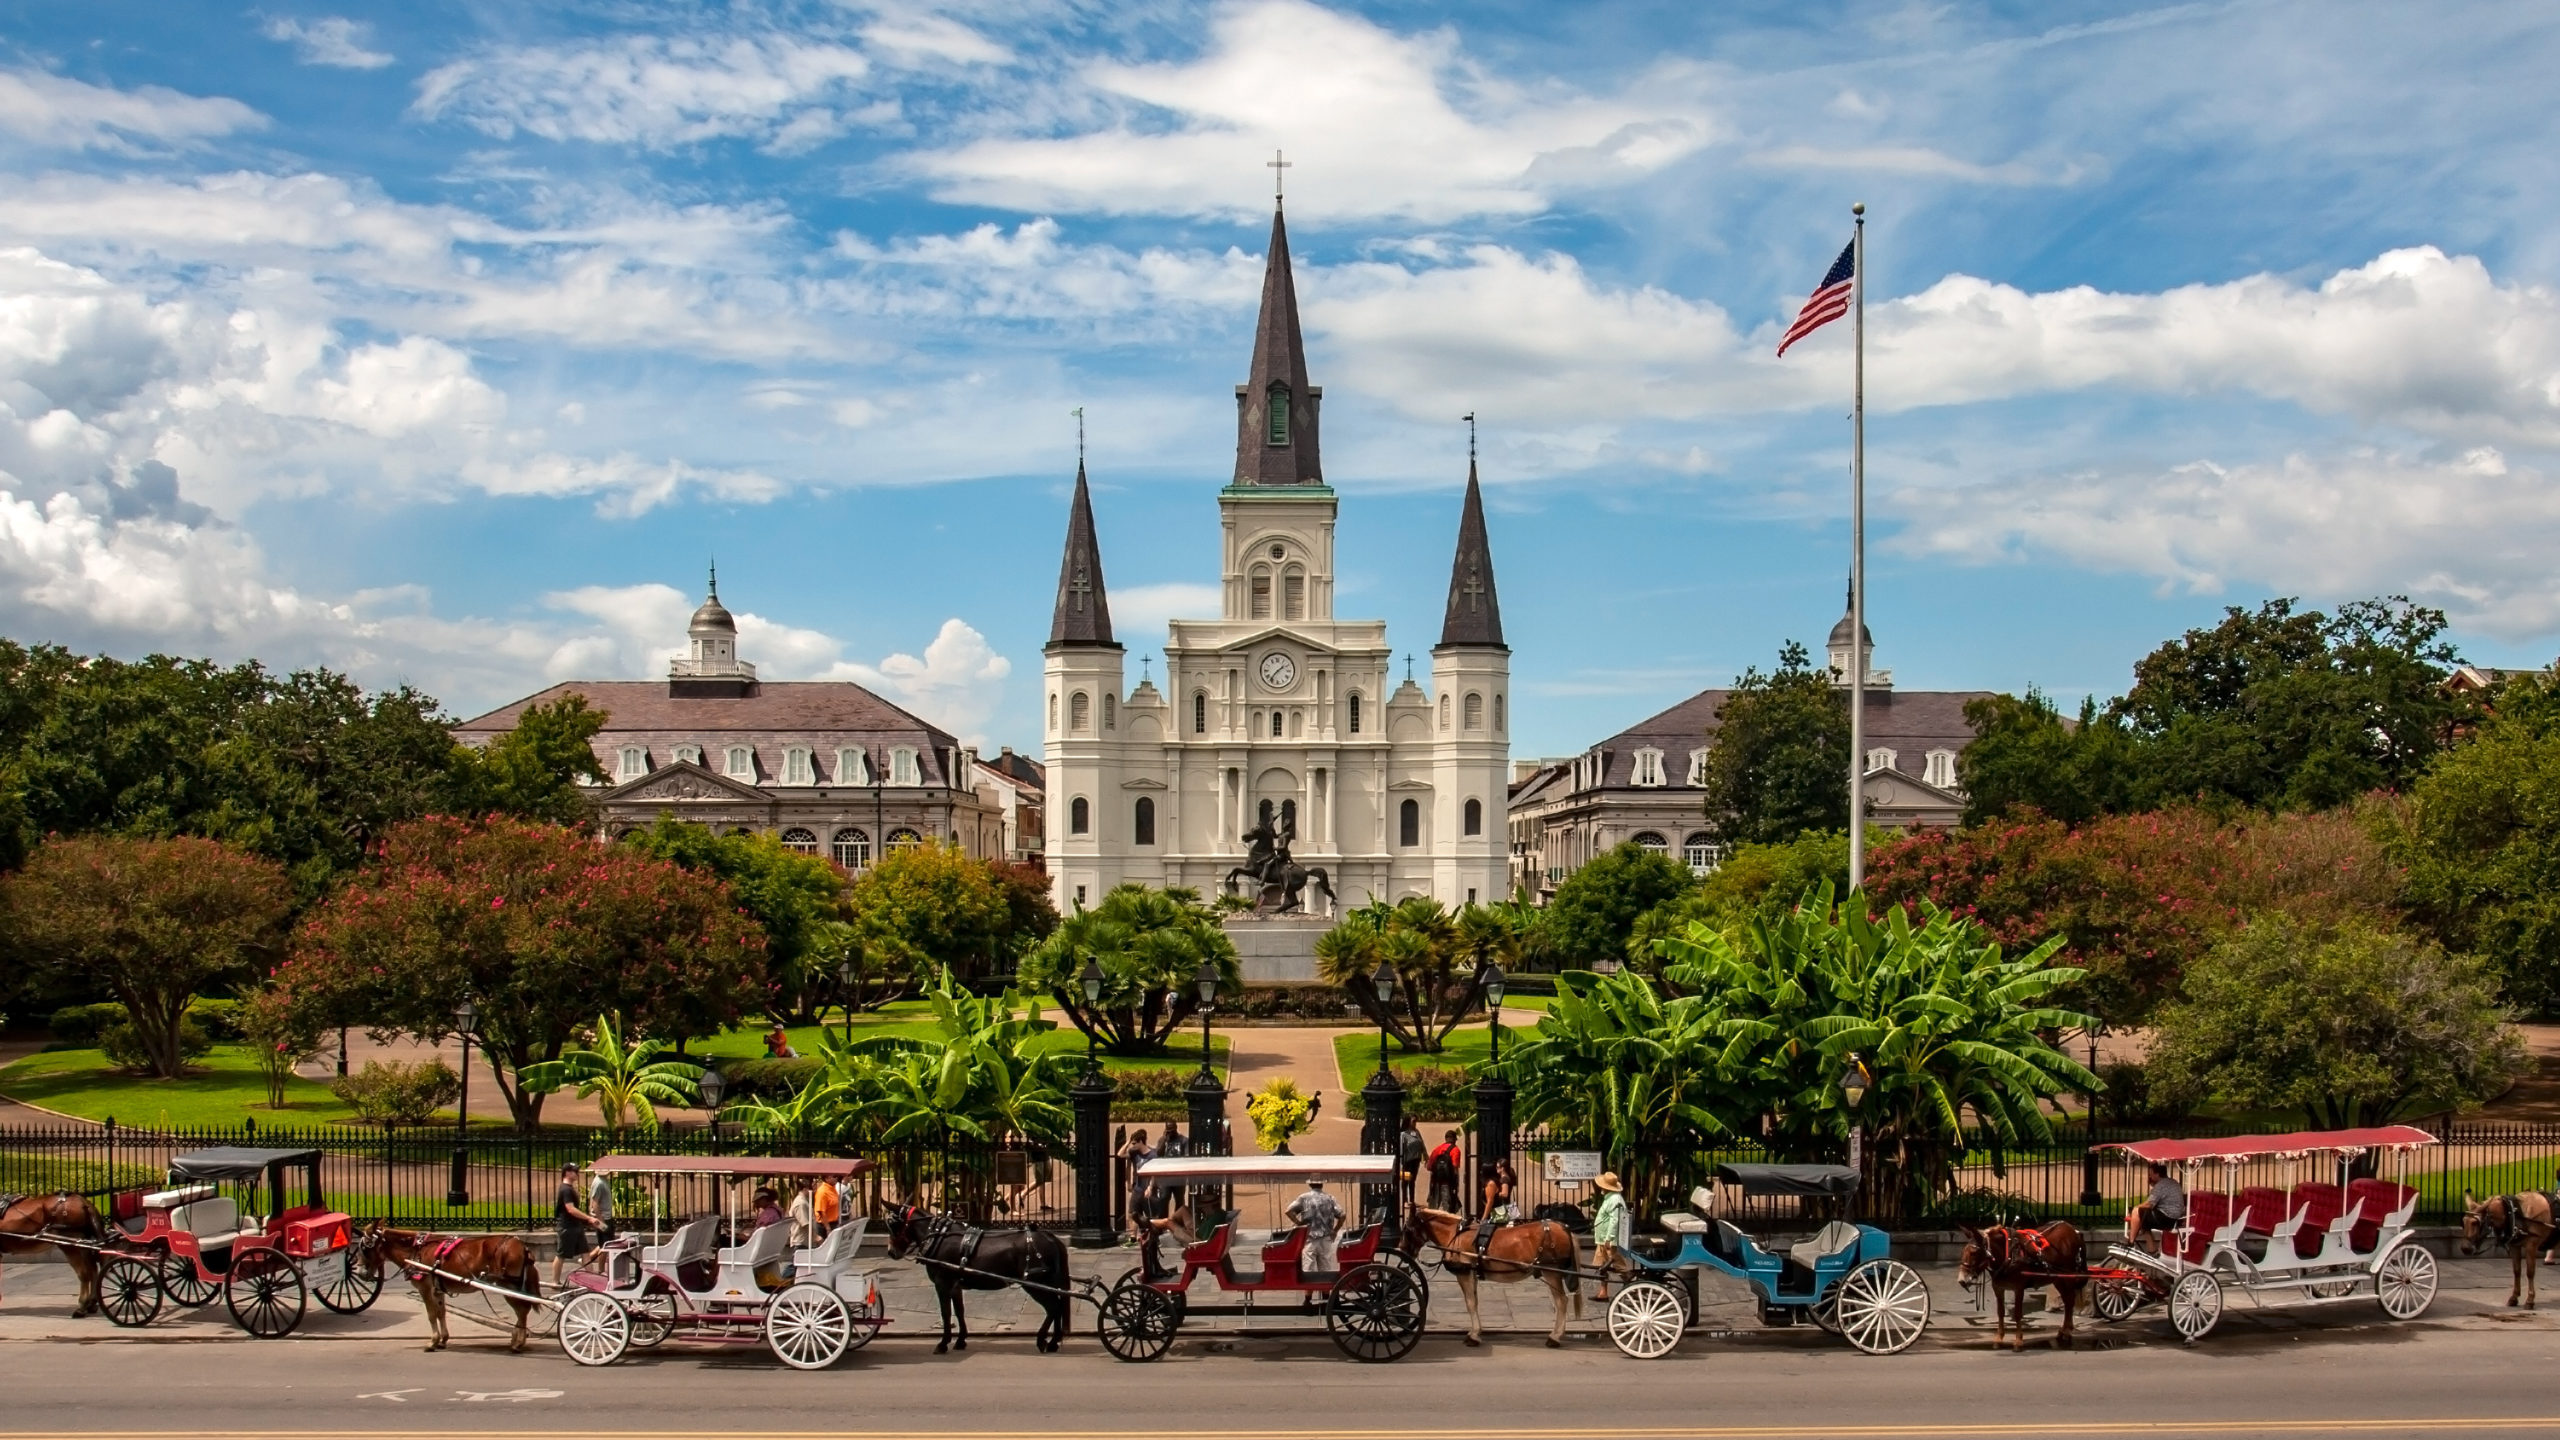 St Louis Cathedral, New Orleans - Rondreis Deep South: Texas, Louisiana & Mississippi |US Travel